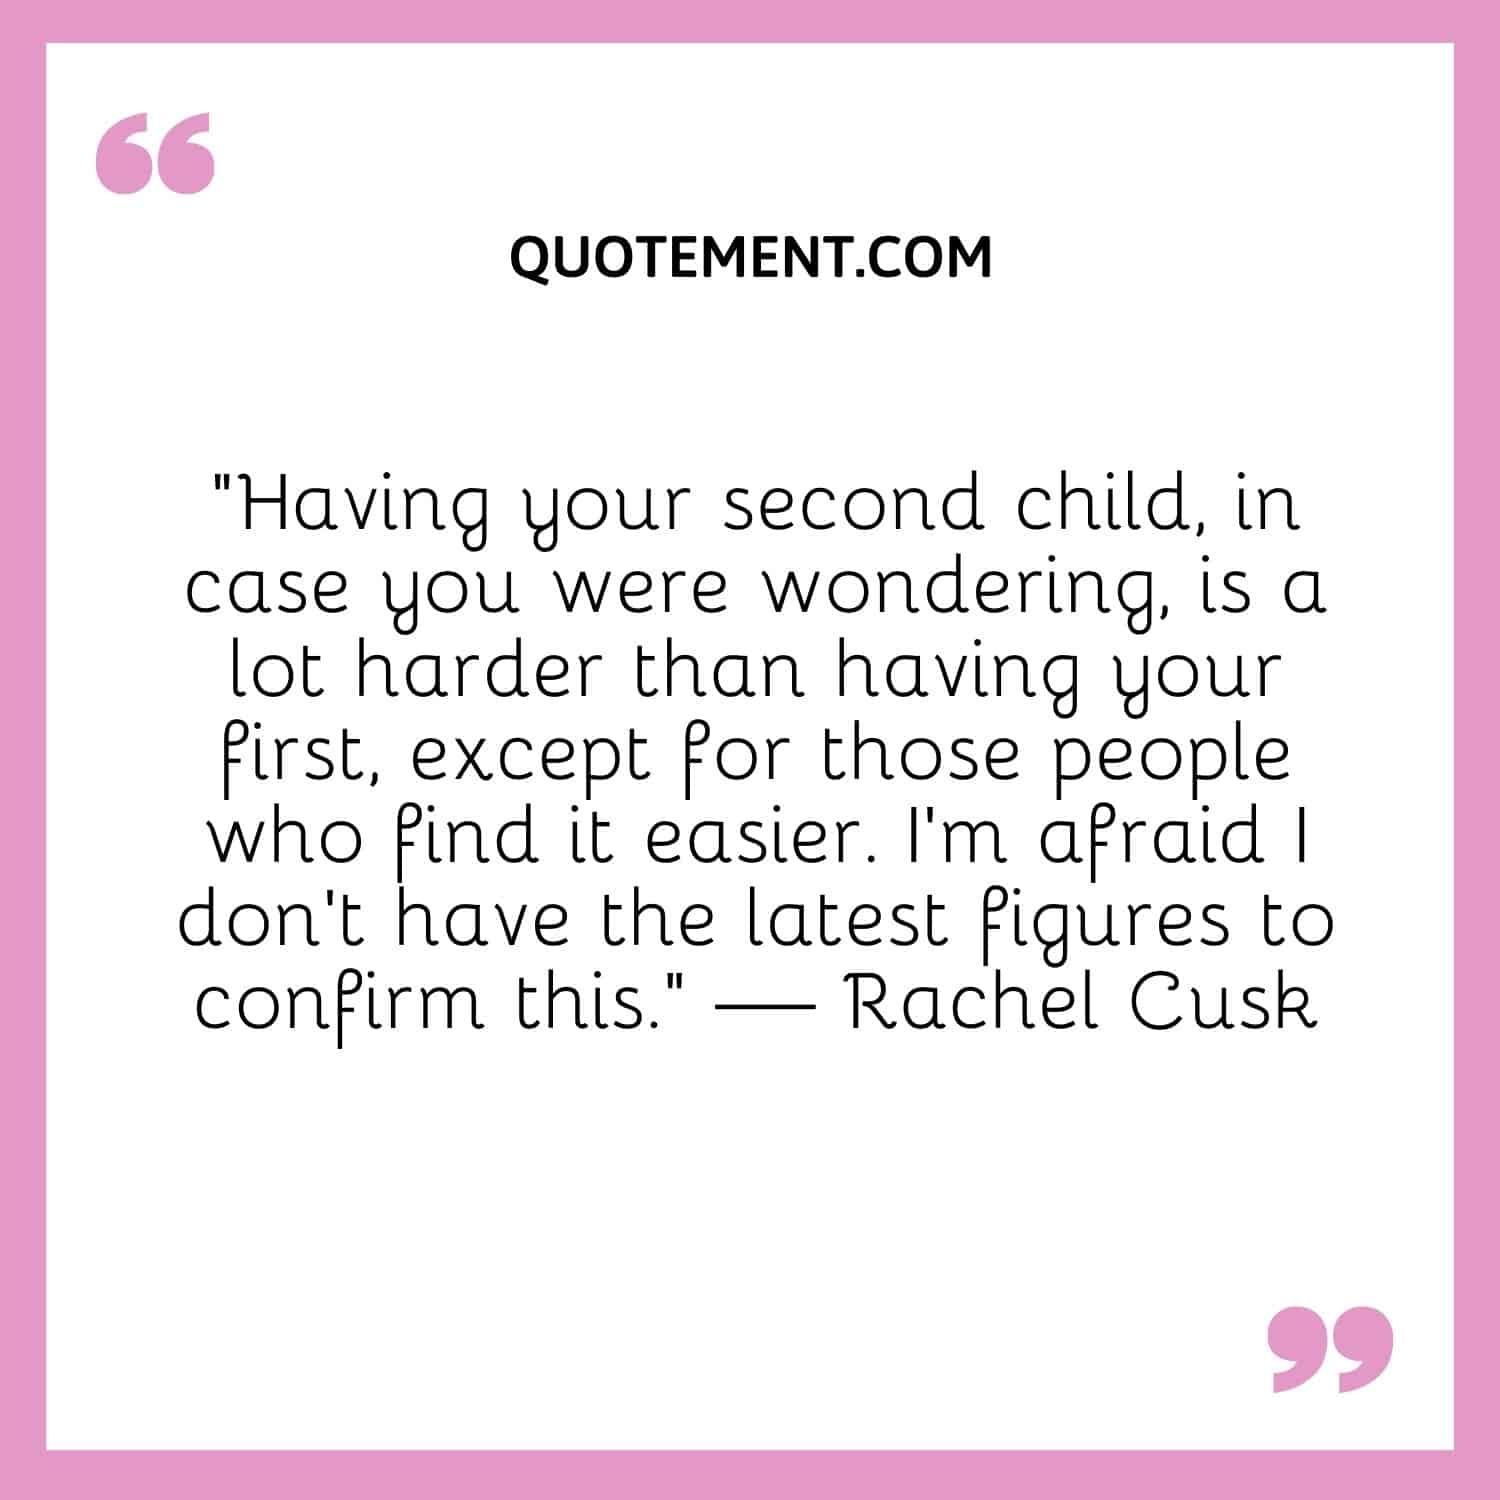 Having your second child, in case you were wondering, is a lot harder than having your first